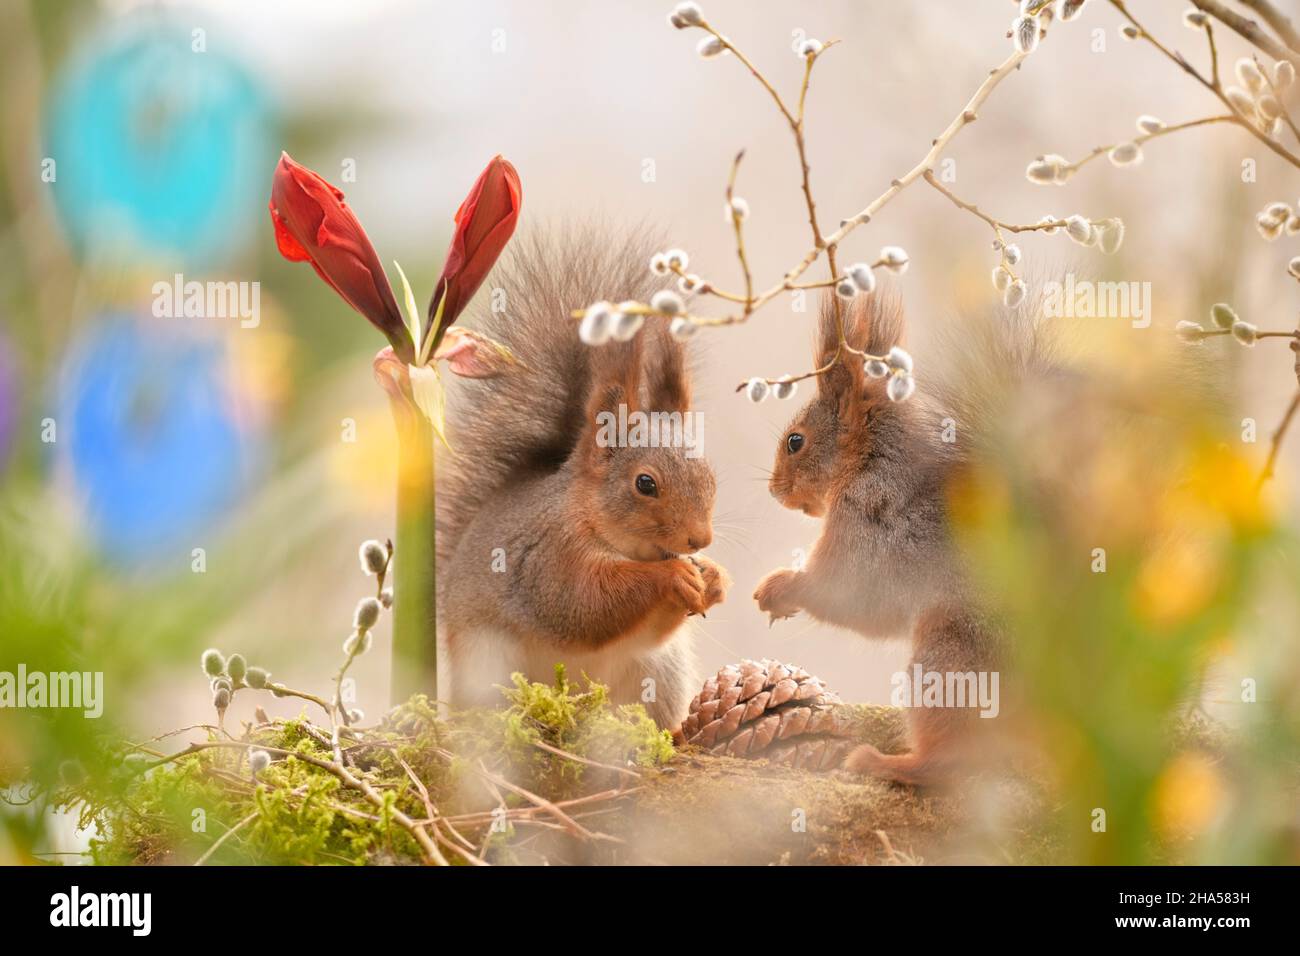 red squirrels are hiding between daffodil,willow and amaryllis flowers Stock Photo